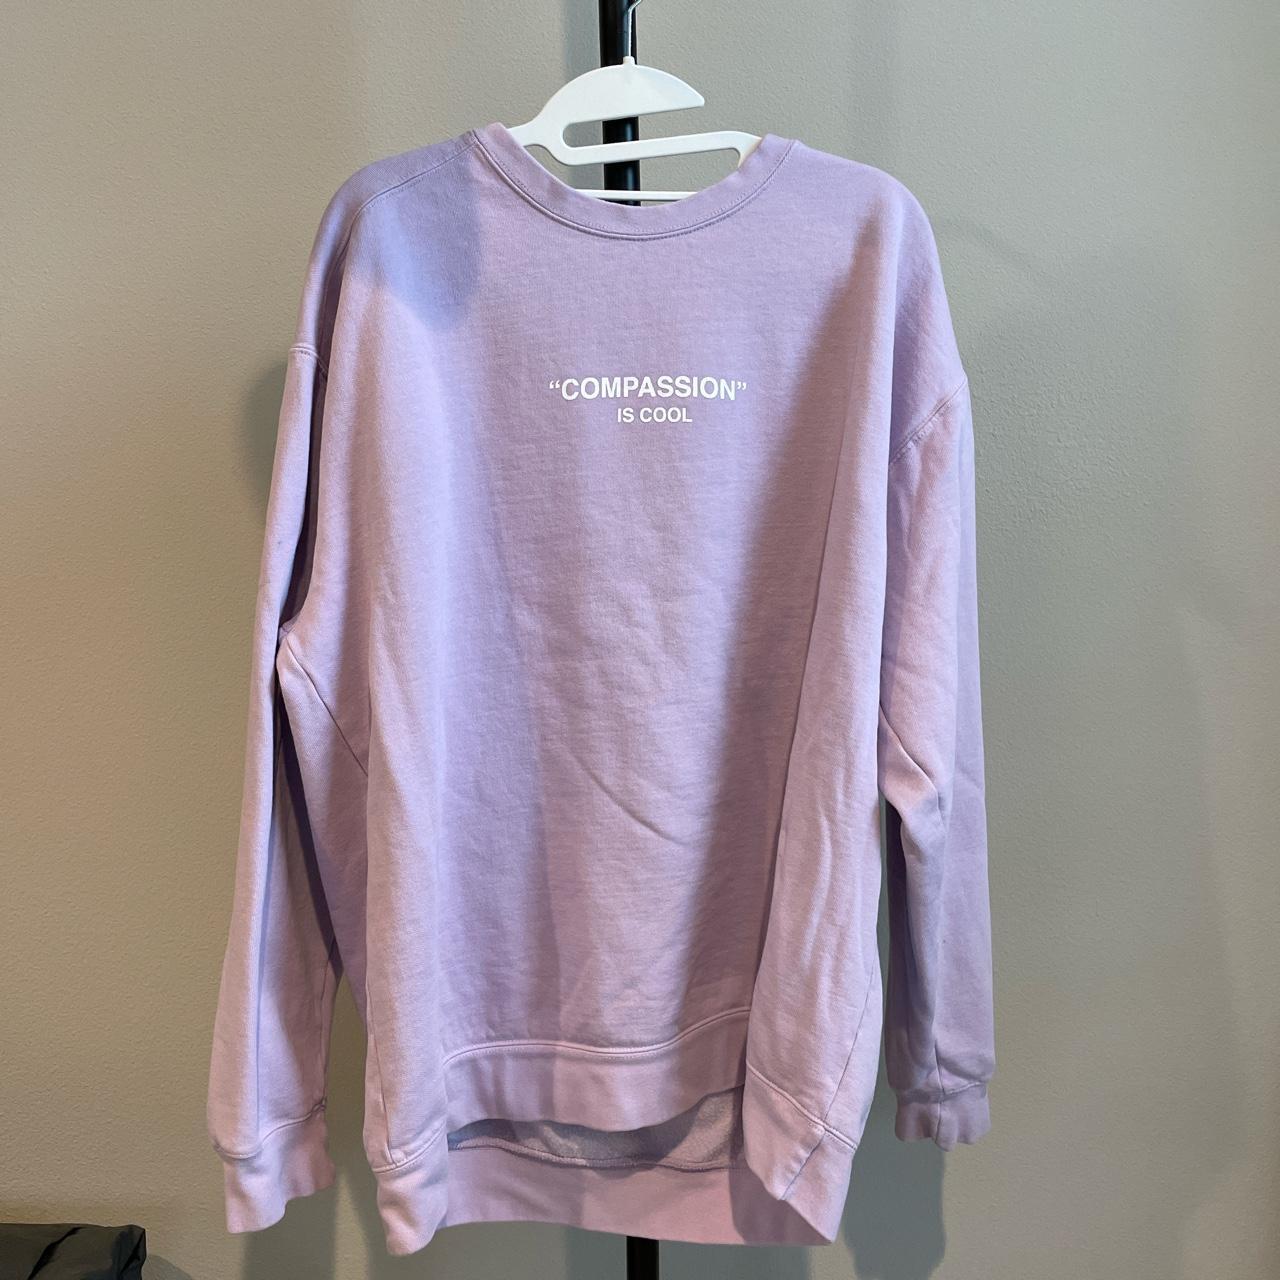 the mayfair group “compassion is cool” crewneck - no... - Depop